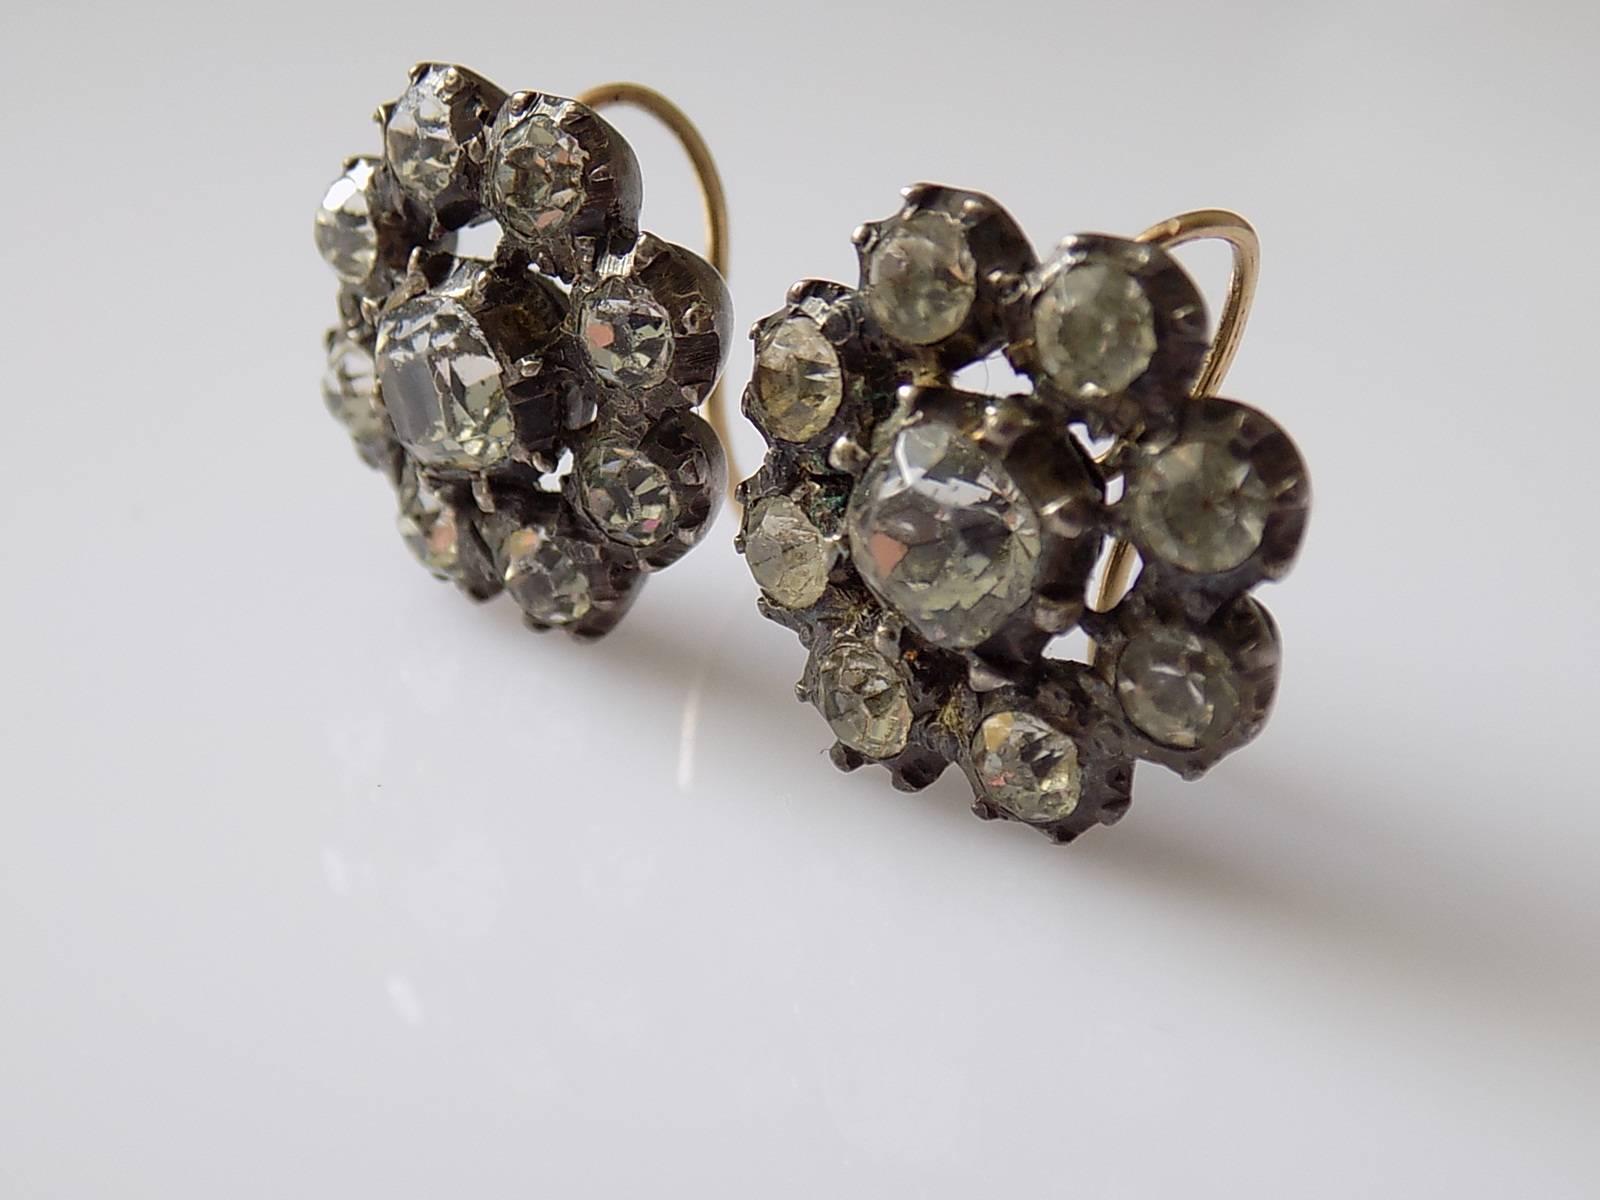 An Antique Georgian c.1800 cushion and round cut Paste cluster earrings for pierced ears. The foil backed paste in close back solid silver setting with a yellow gold hooks. English Origin.
Width 18mm.
Weight 9.2gr.
Unmarked.